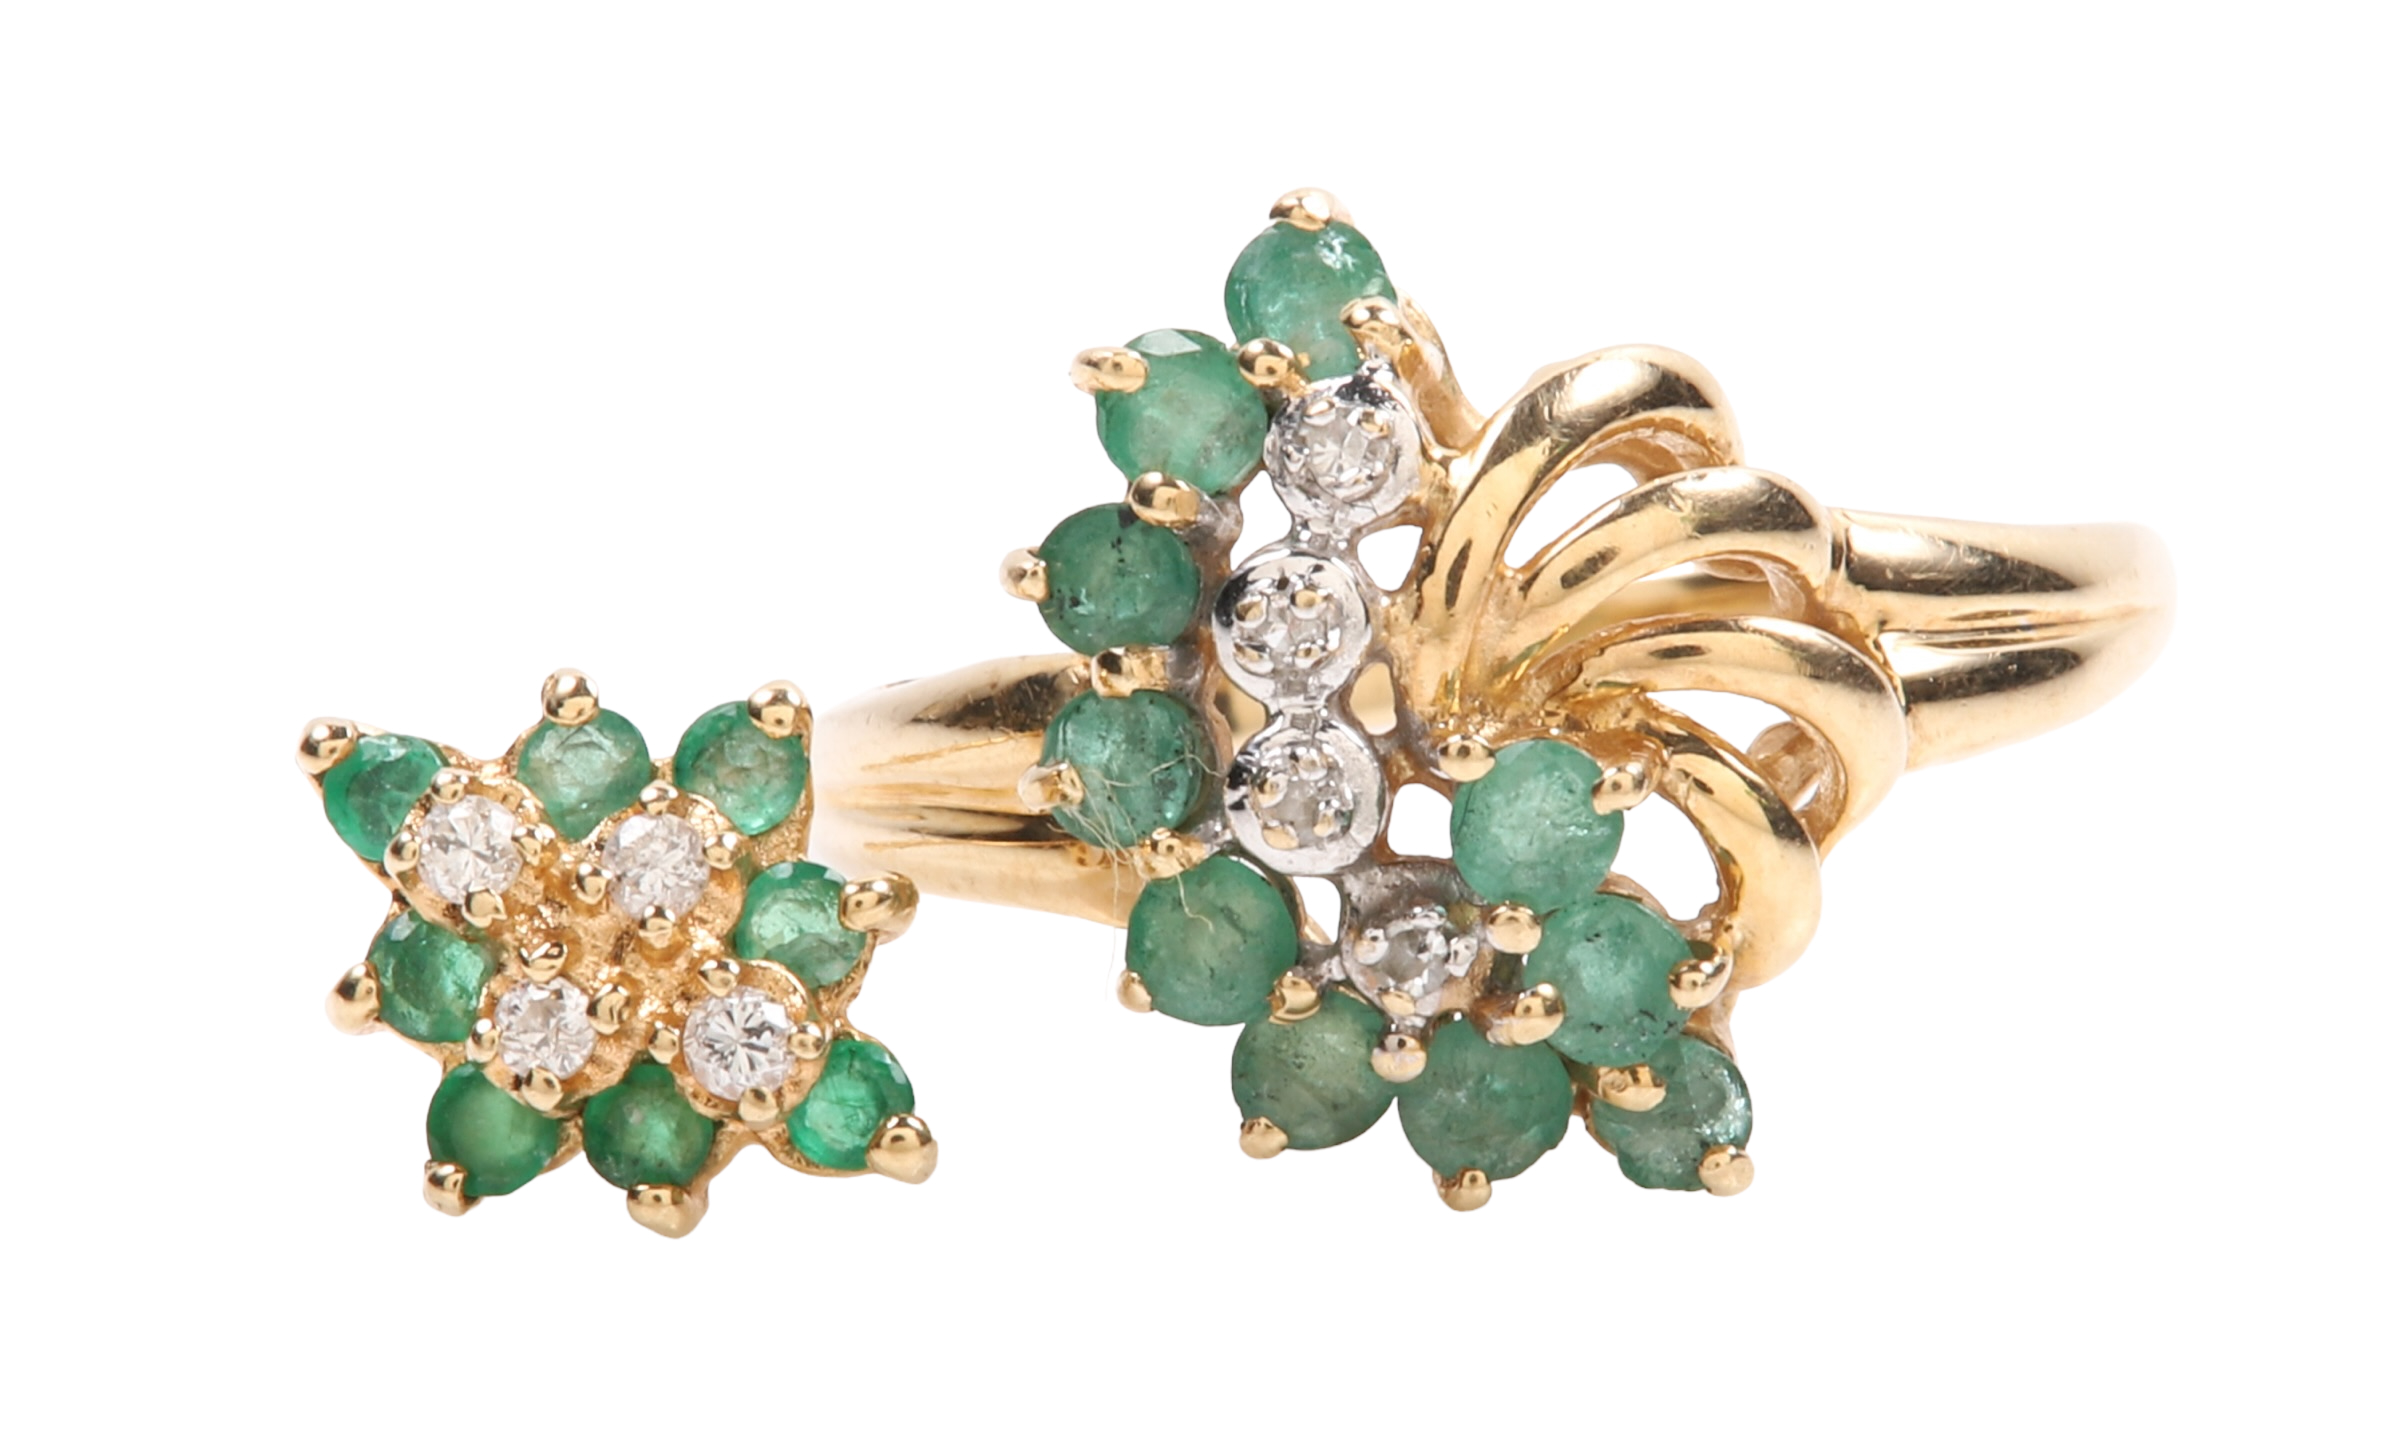 14K YG green stone ring and earring